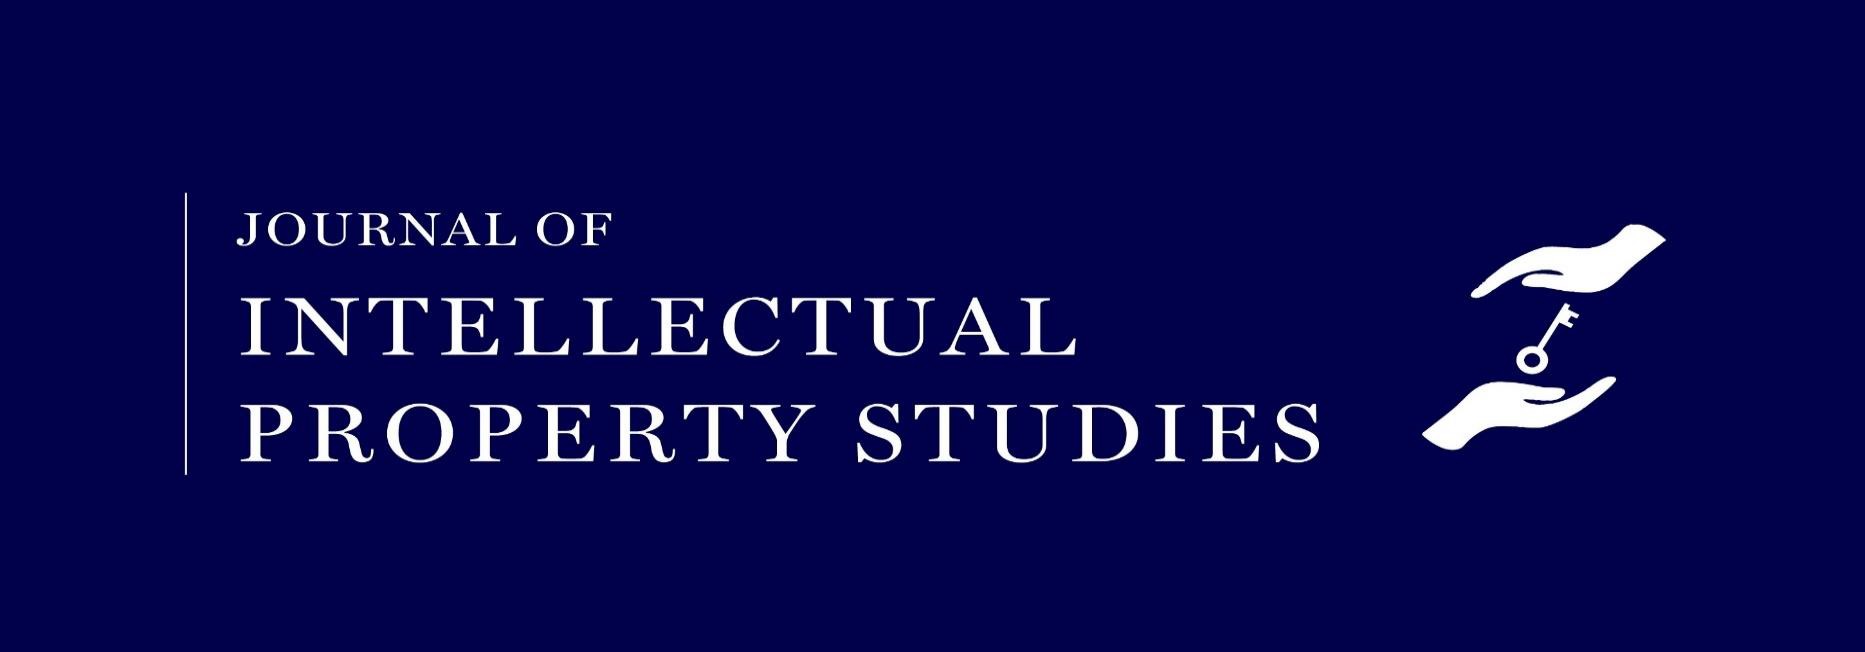 Call for Papers: NLU Jodhpur’s Journal of Intellectual Property Studies Vol. VII, Issue II [Submit by May 28]